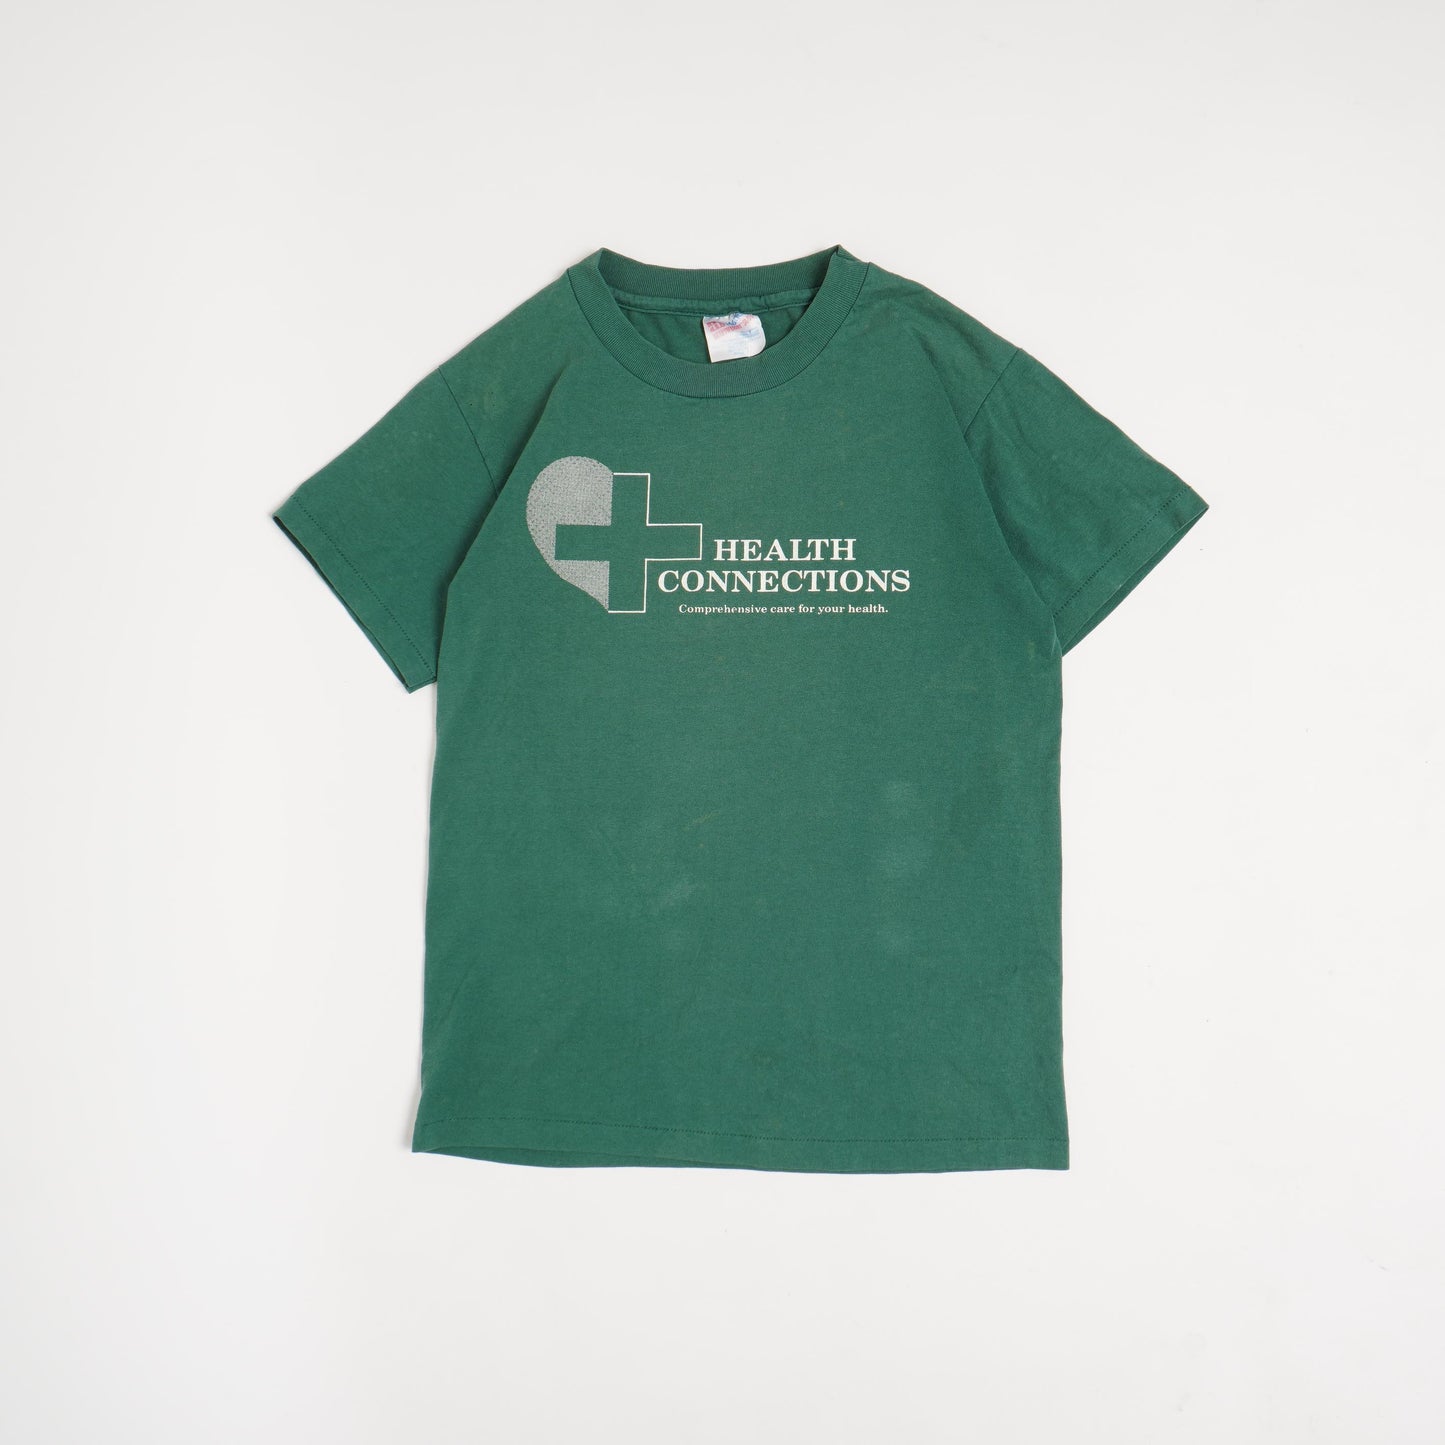 1990s HEALTH CONDITIONS T-SHIRT - M